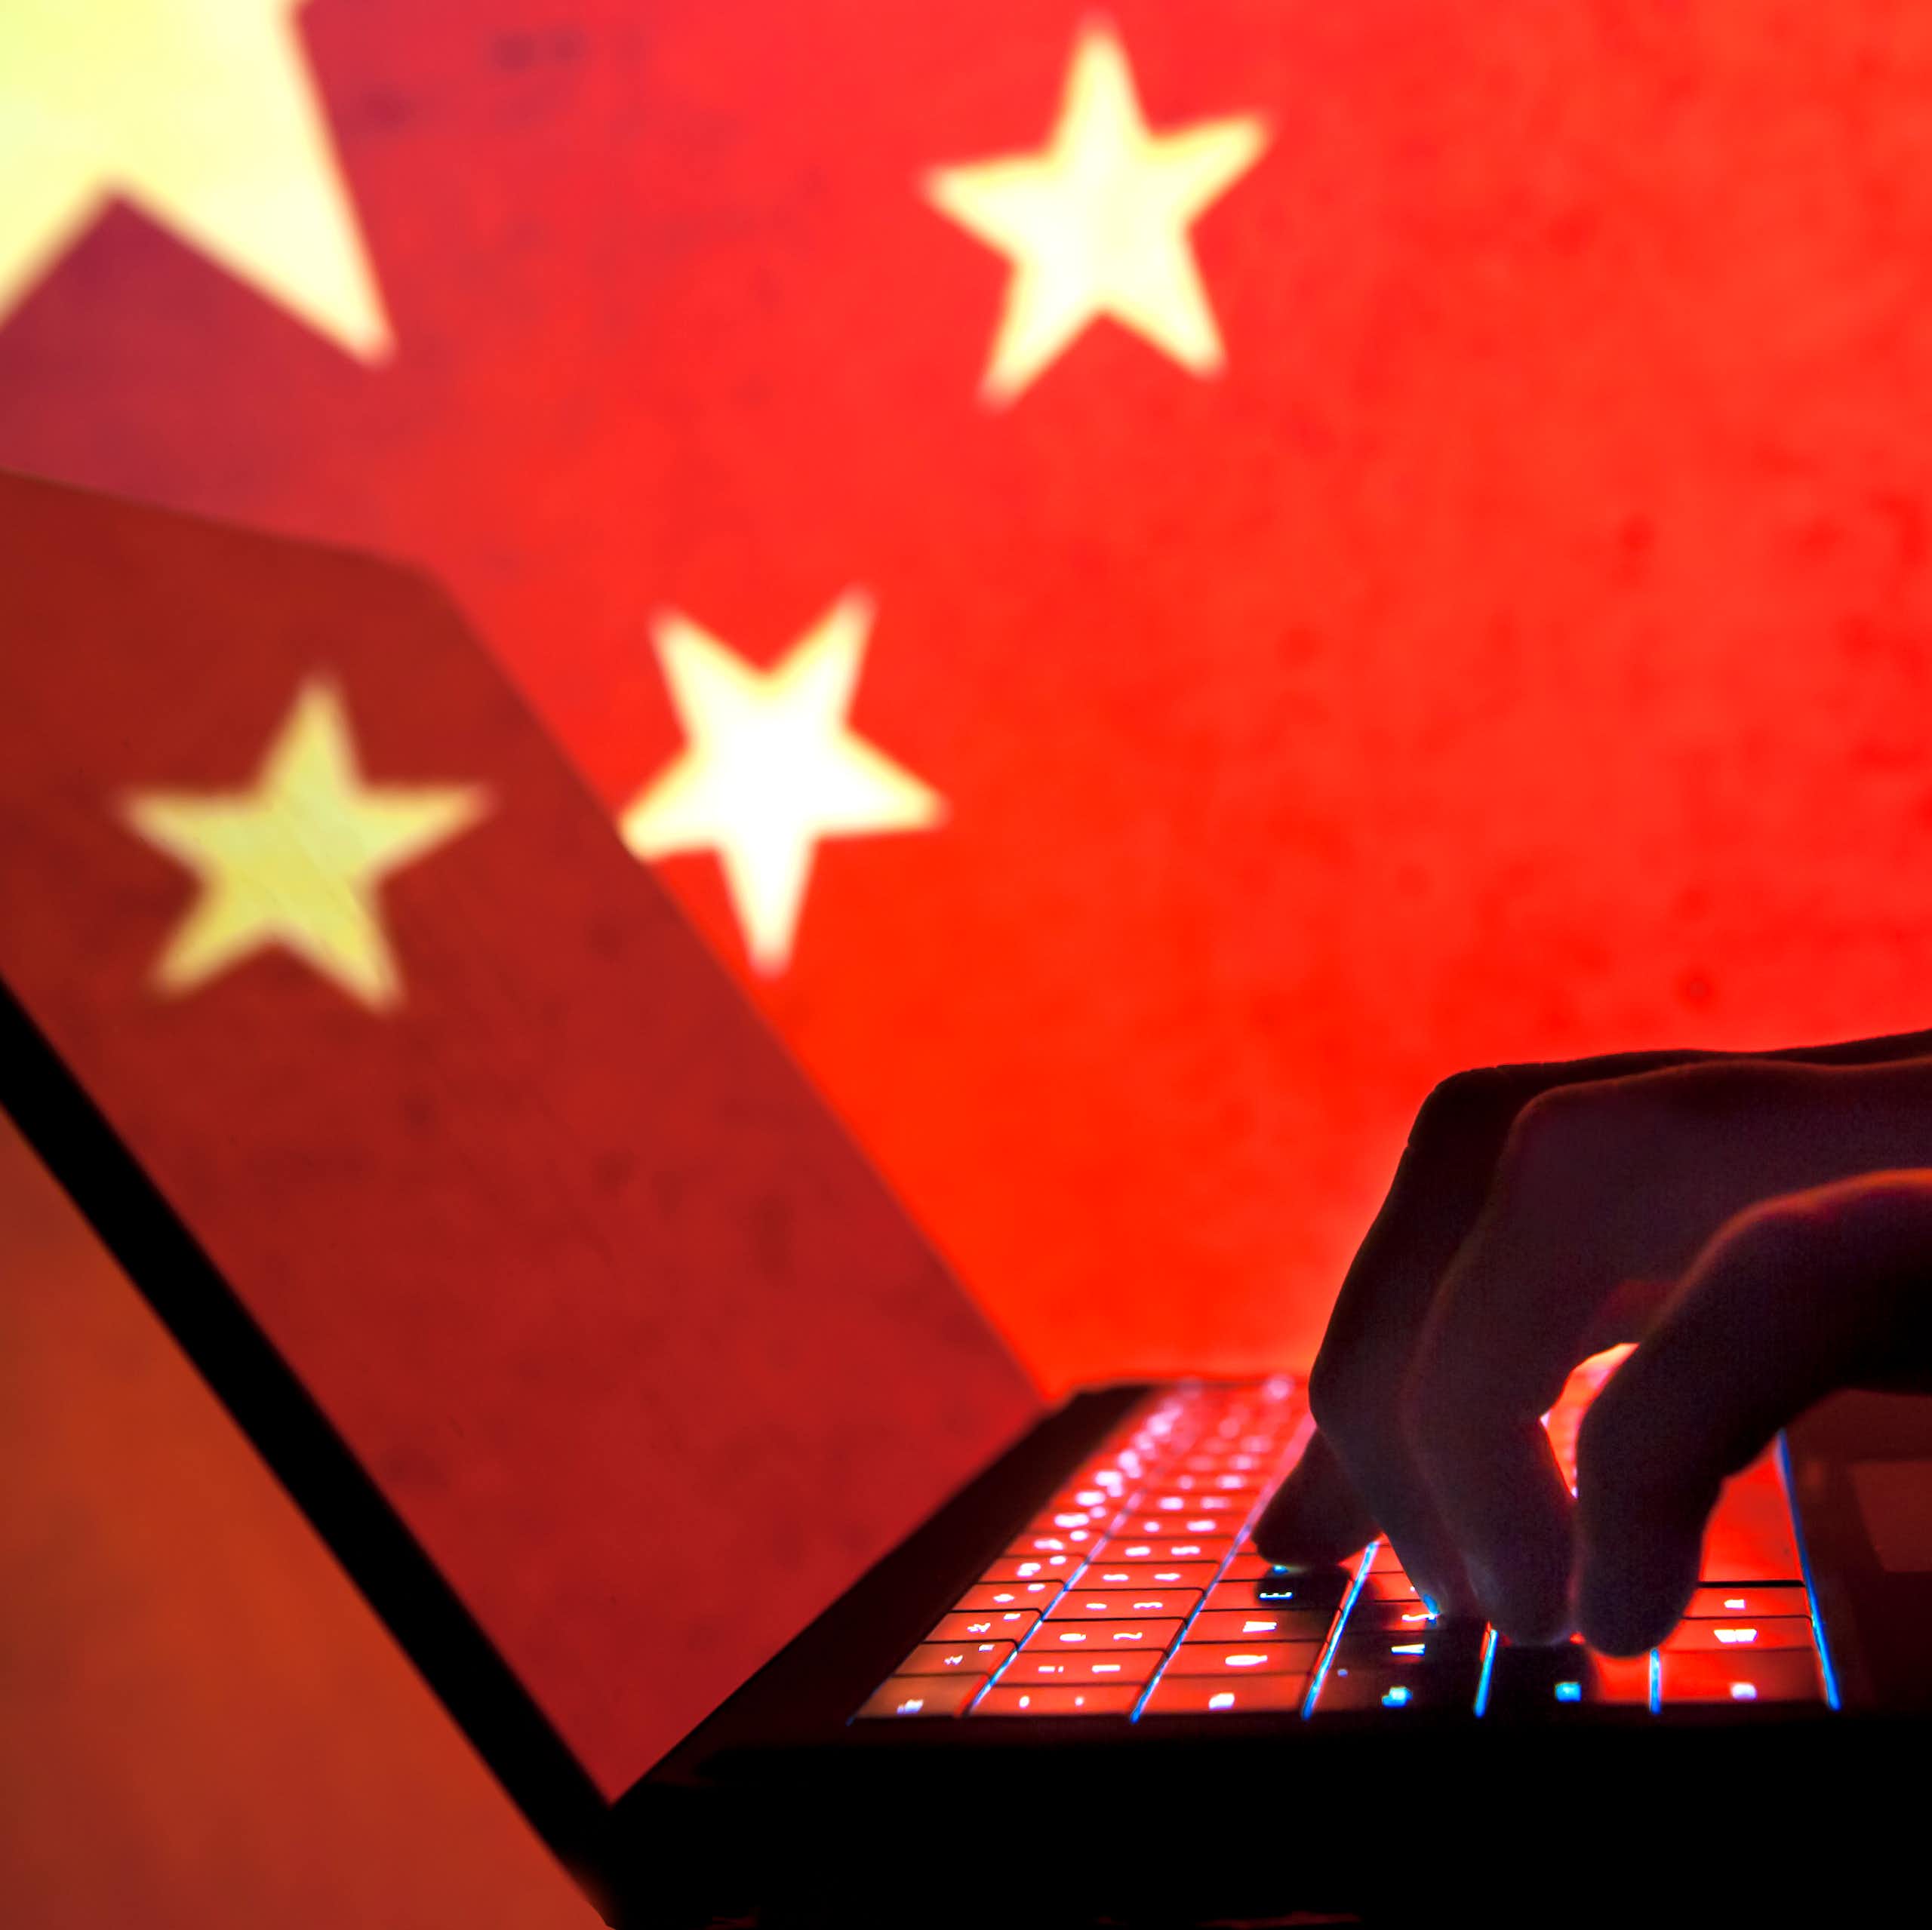 A silhouette of a hand on a laptop is seen in front of a Chinese flag.